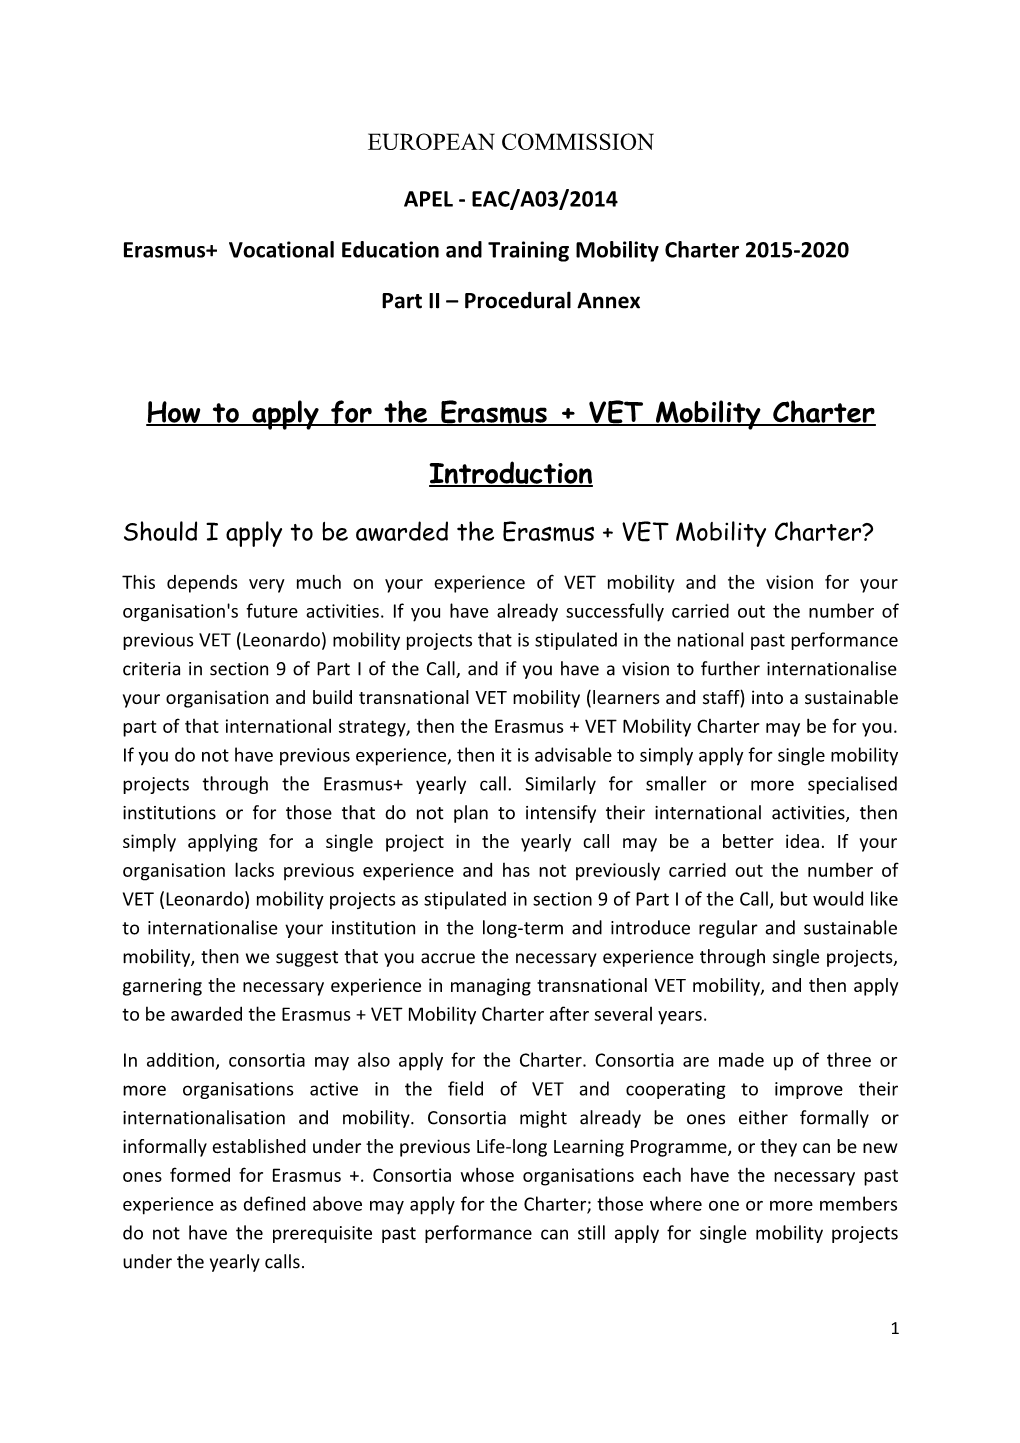 Erasmus+ Vocational Education and Training Mobility Charter 2015-2020